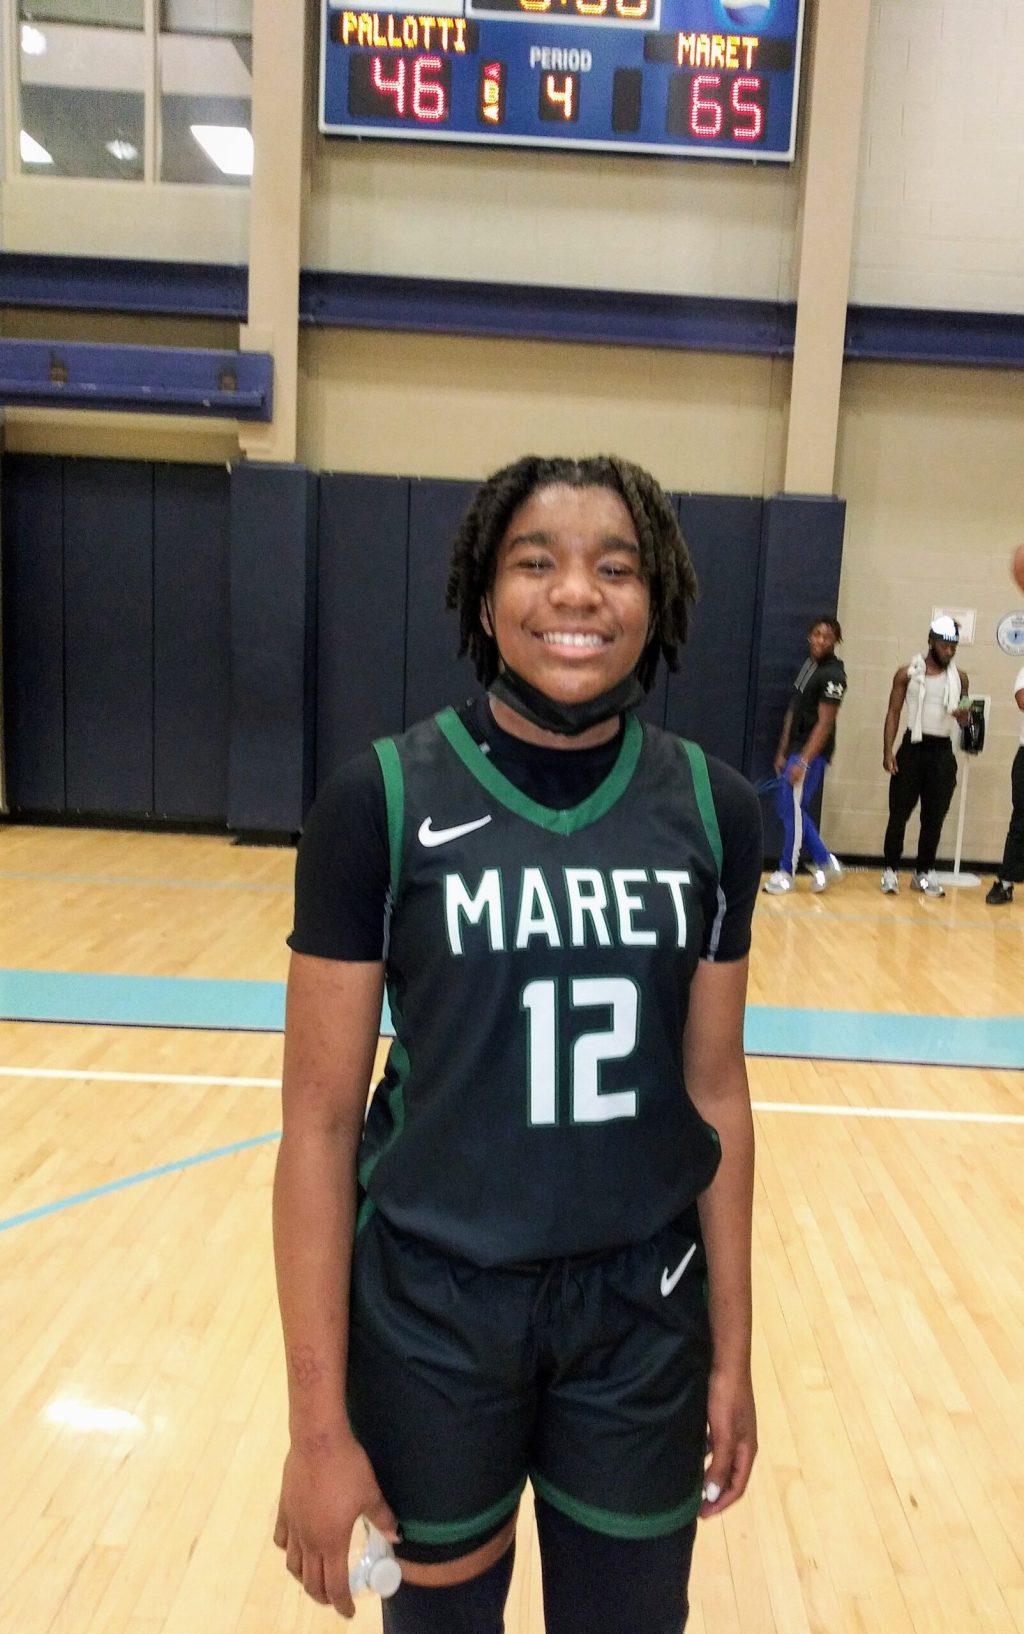 Notes From Maret&#8217;s Win Over Pallotti